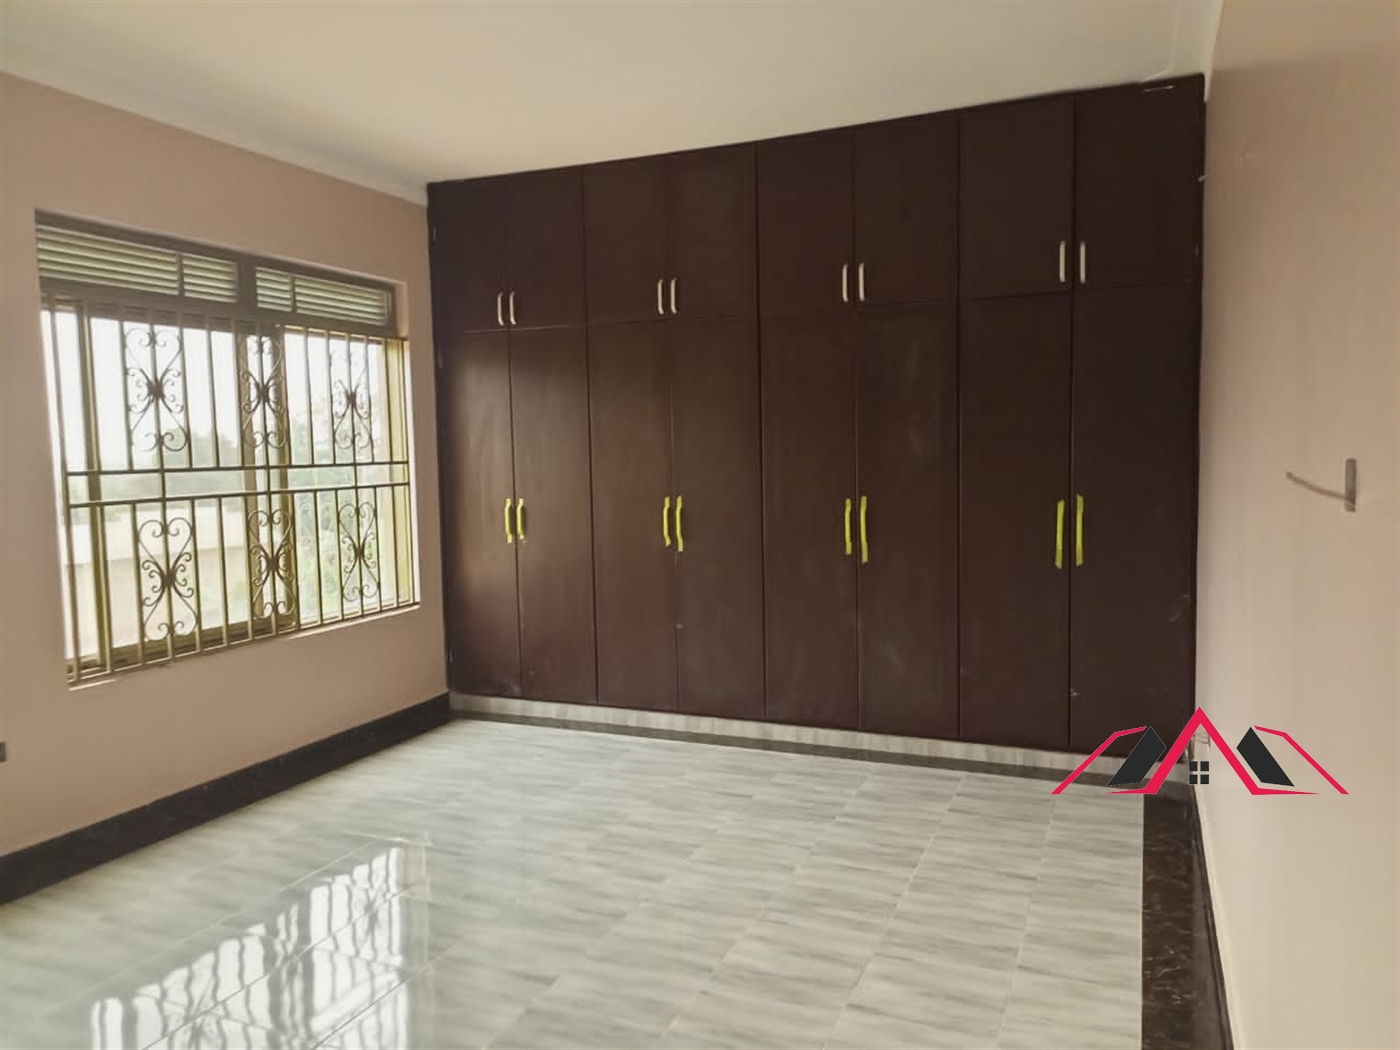 Storeyed house for sale in Entebbe Kampala